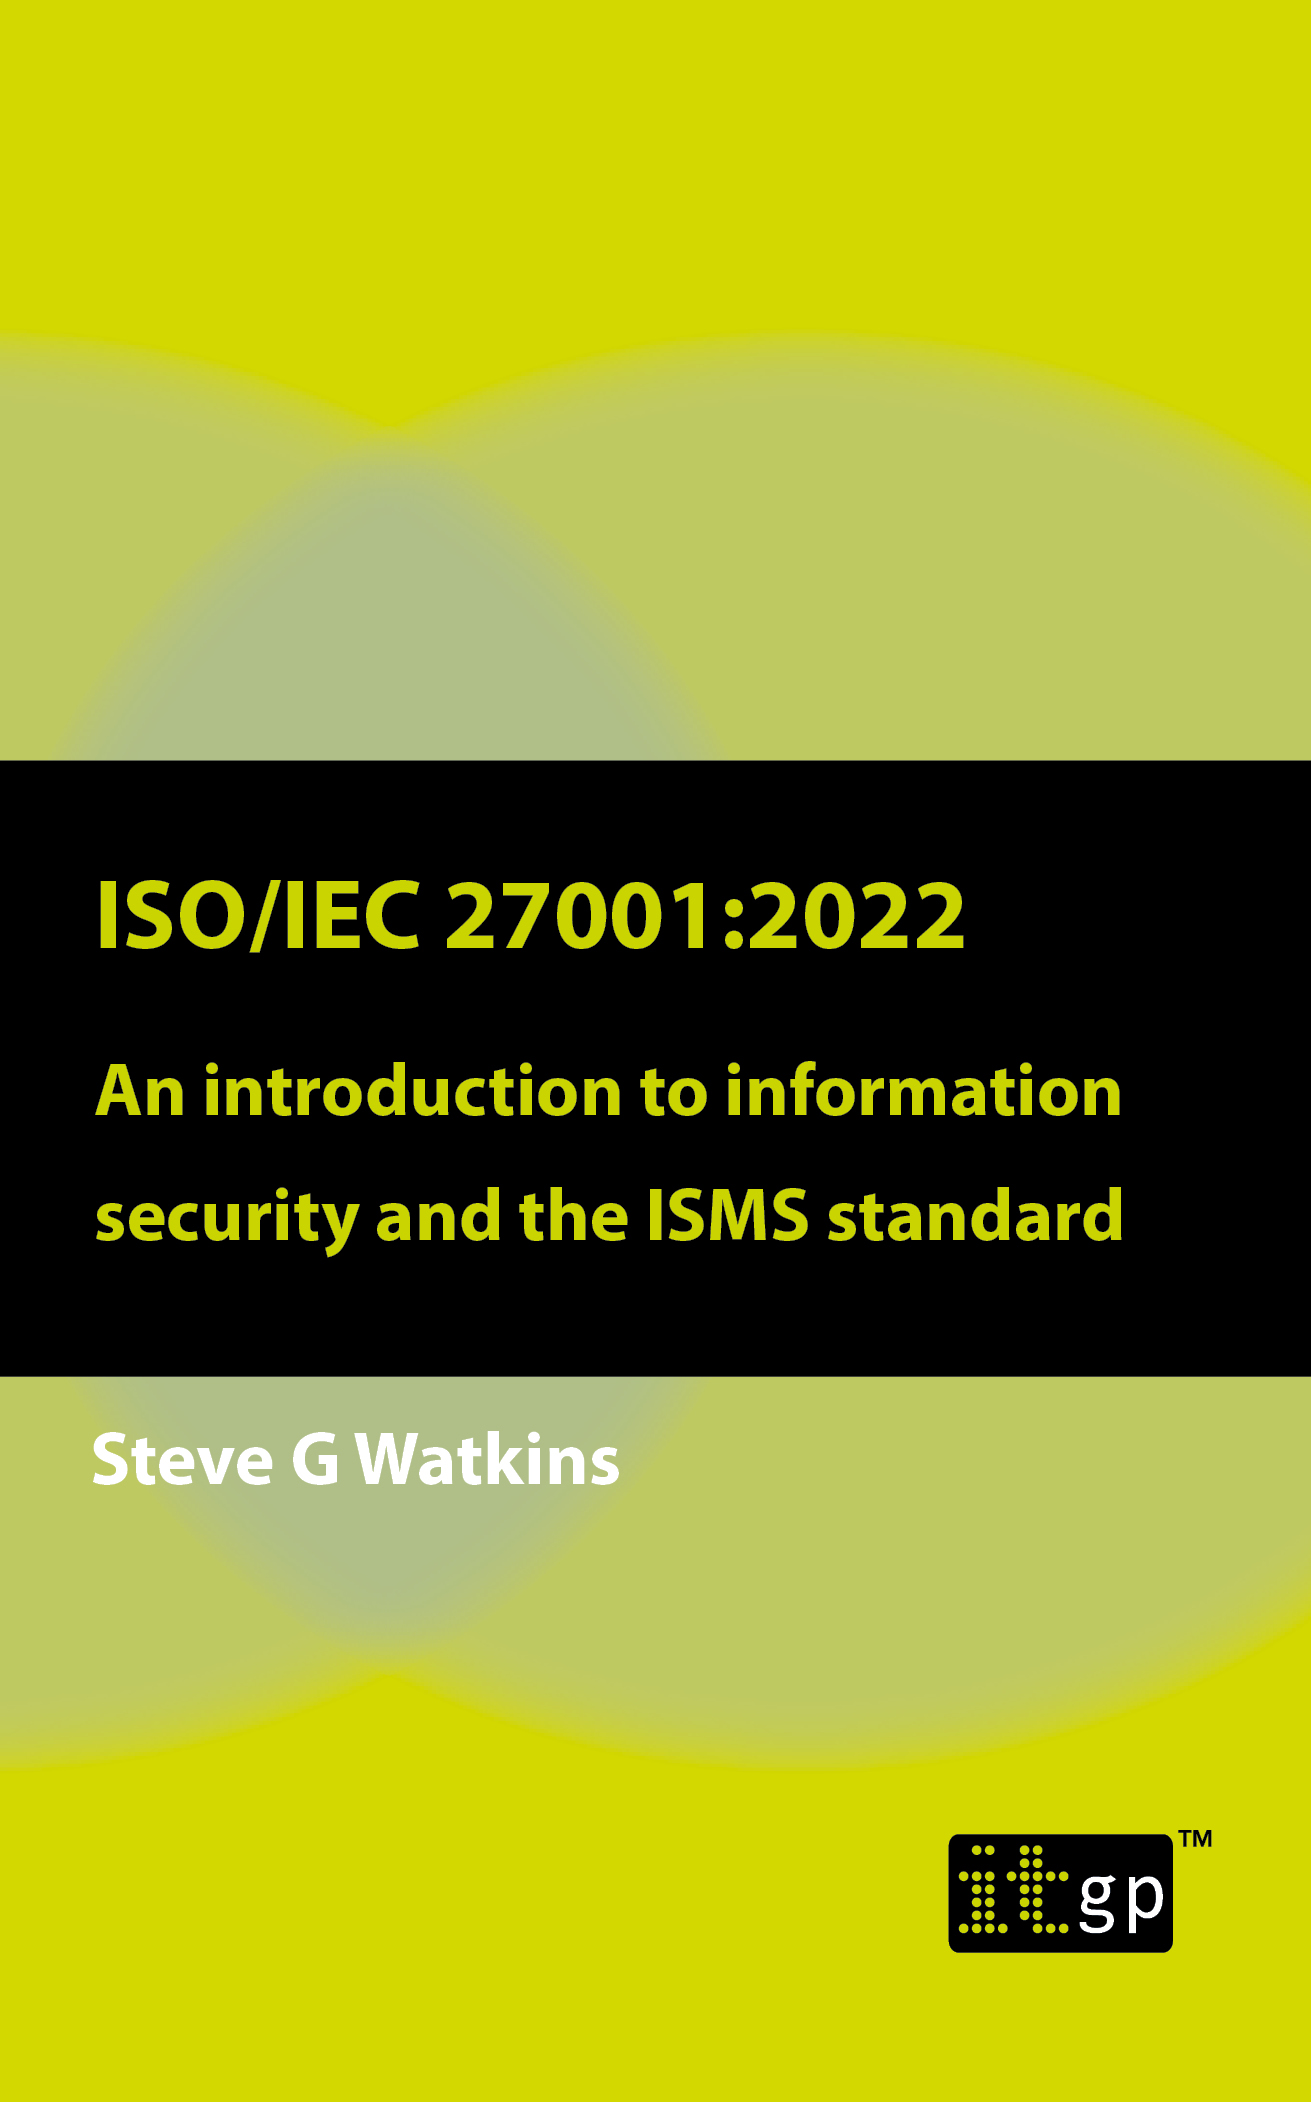 ISO/IEC 27001:2022 – An introduction to information security and the ISMS standard